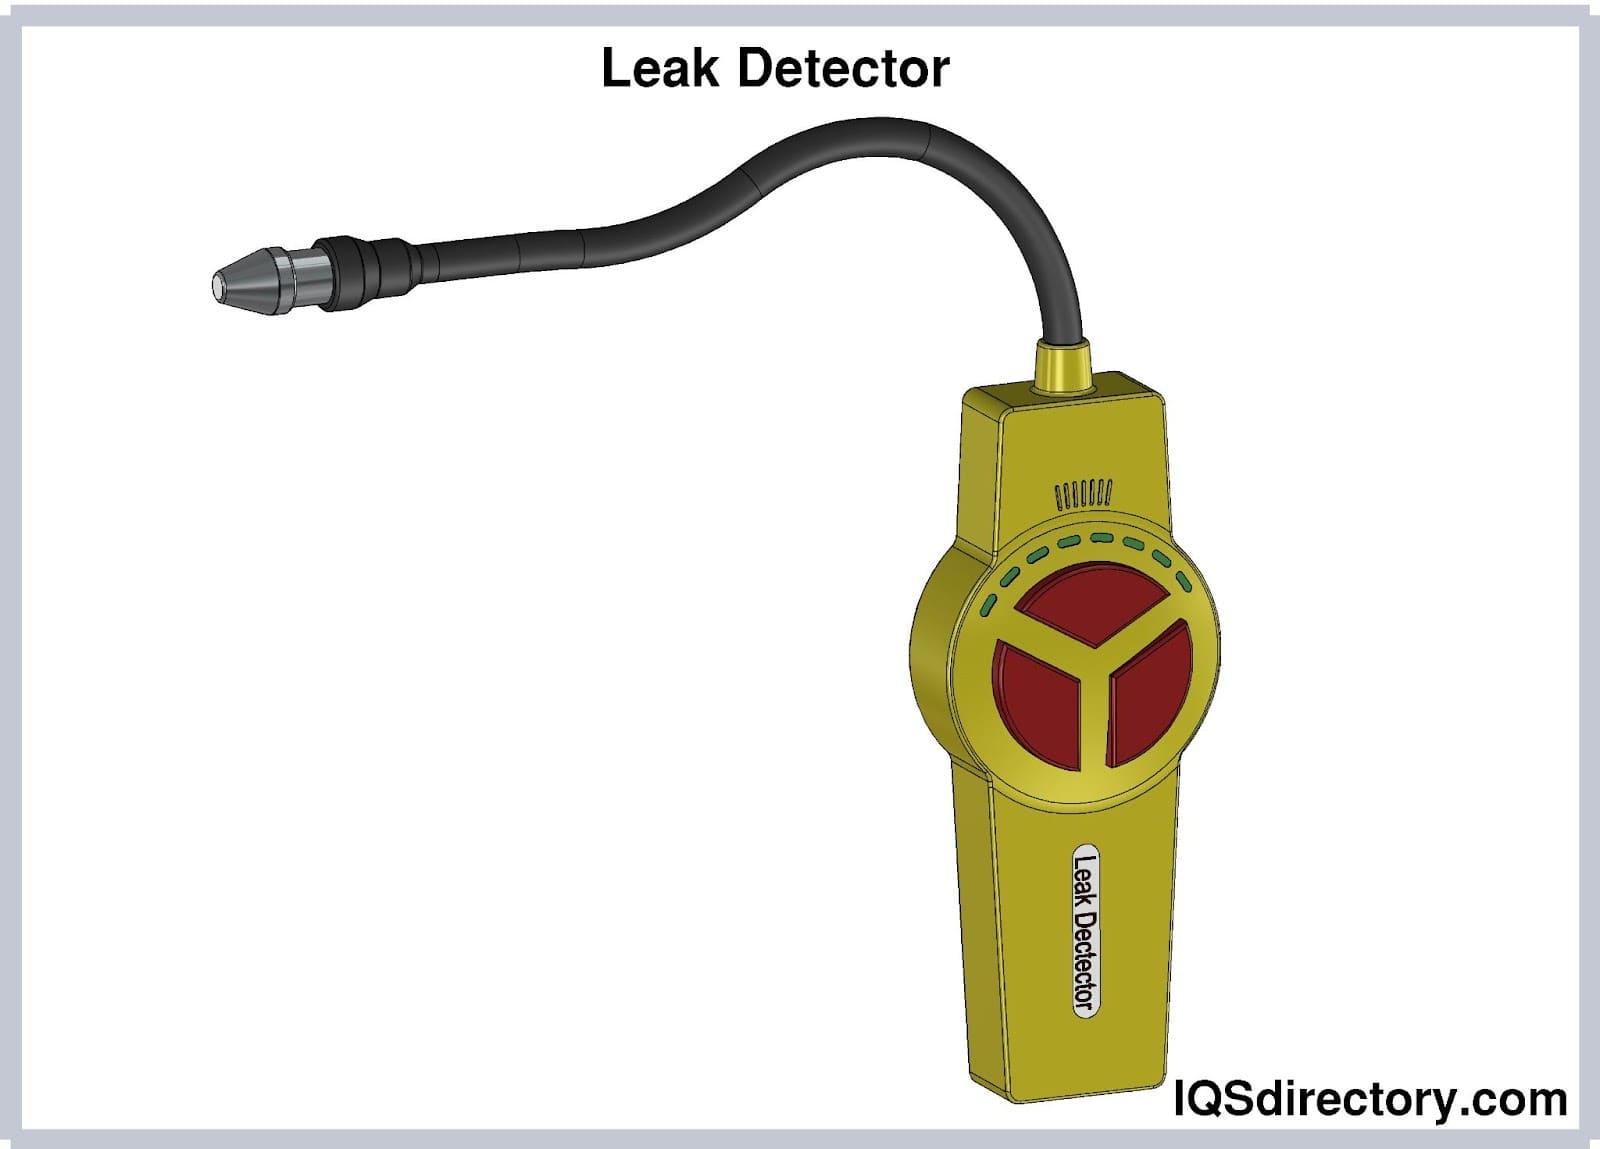 Unbelievable! Discover the Top 5 Water Leak Detection Systems that Will  Change Your Life! 